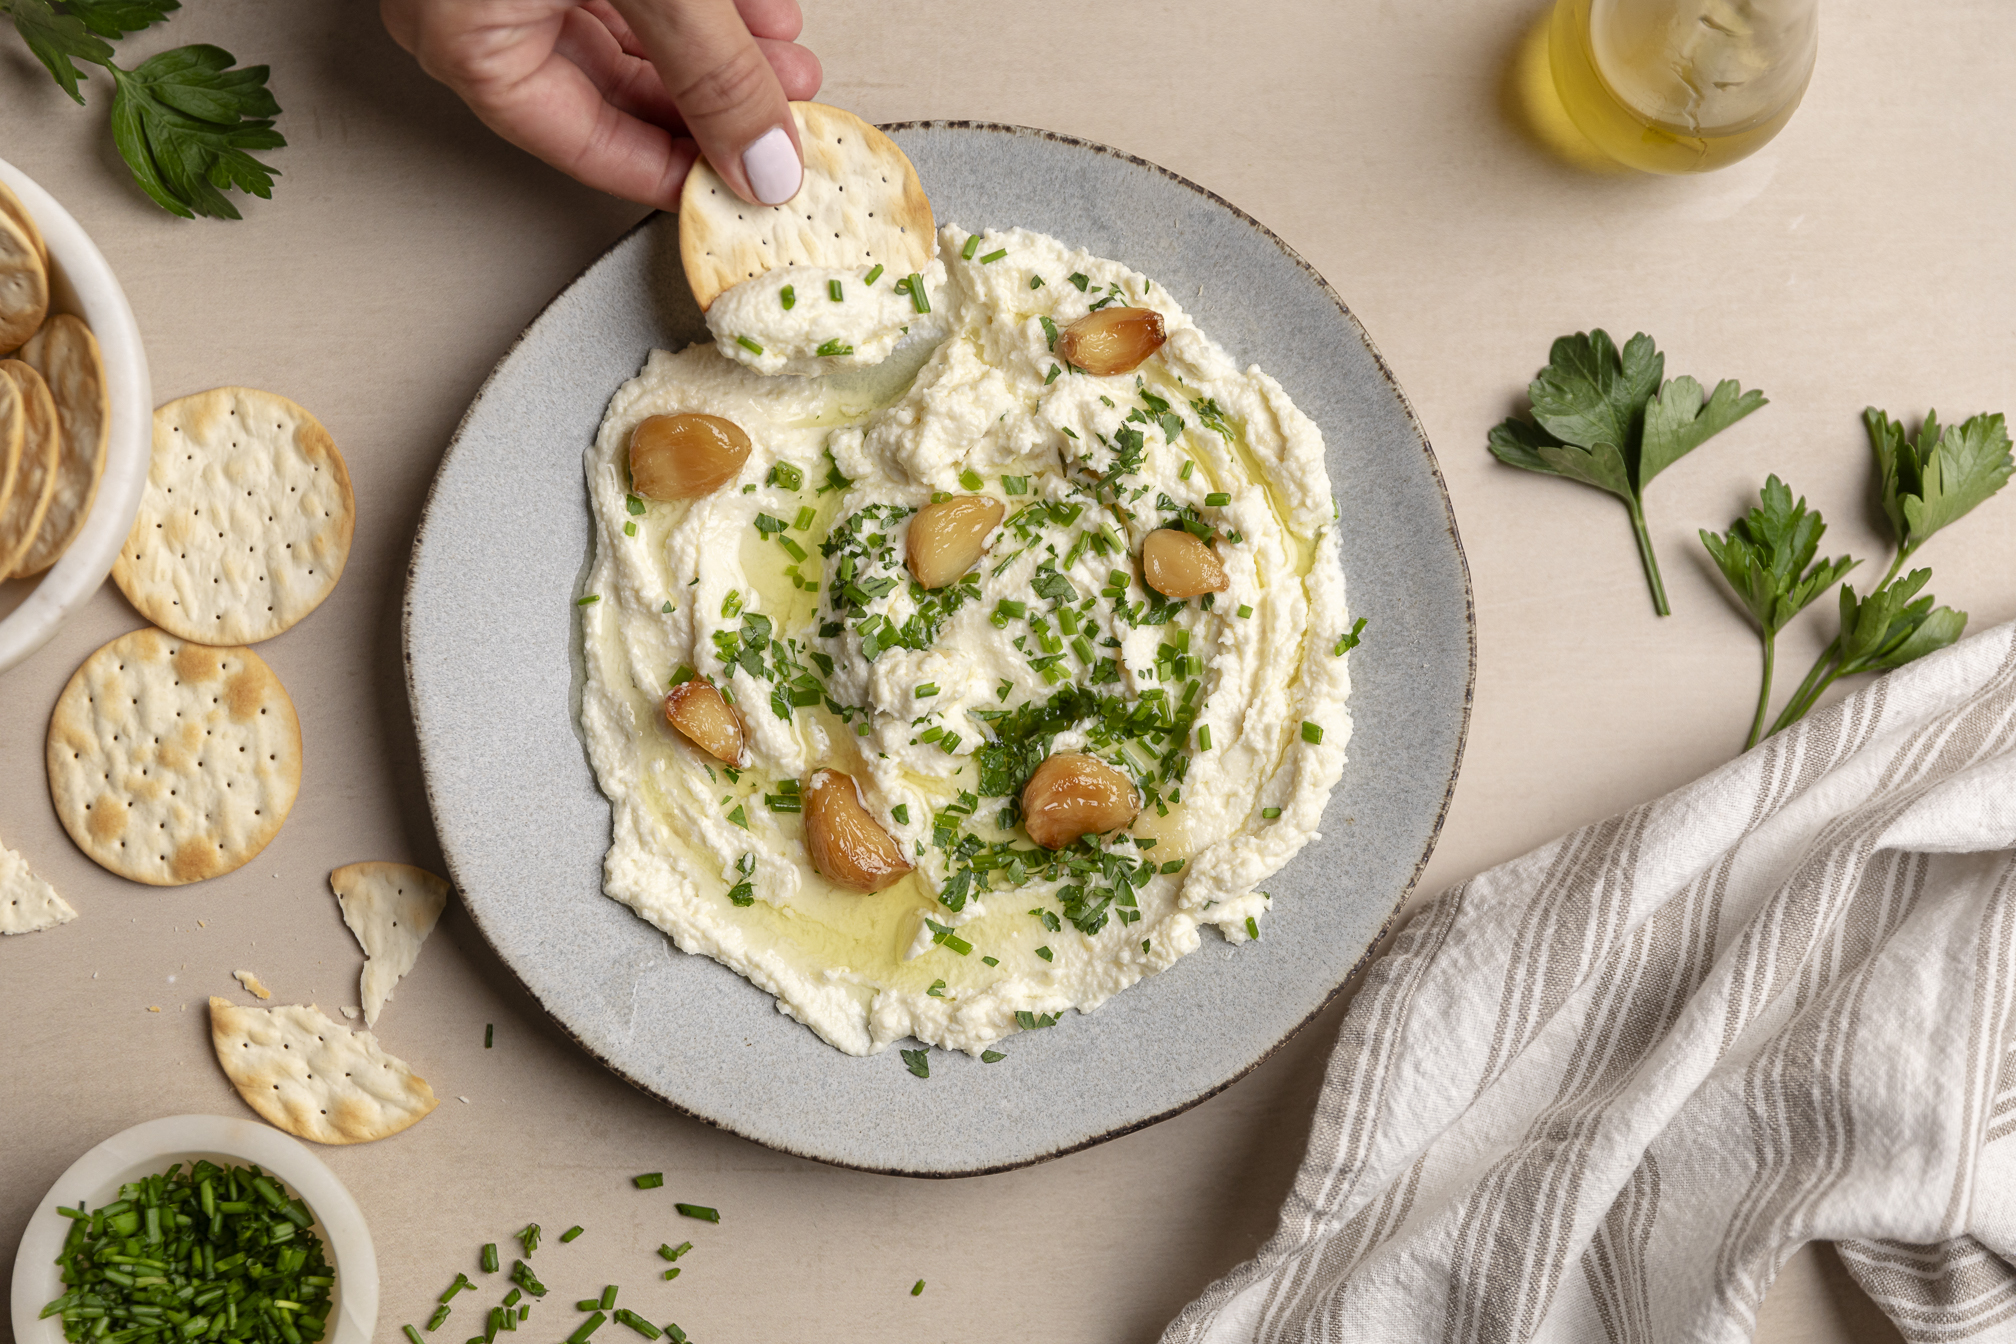 Whipped Ricotta with Roasted Garlic and Herbs